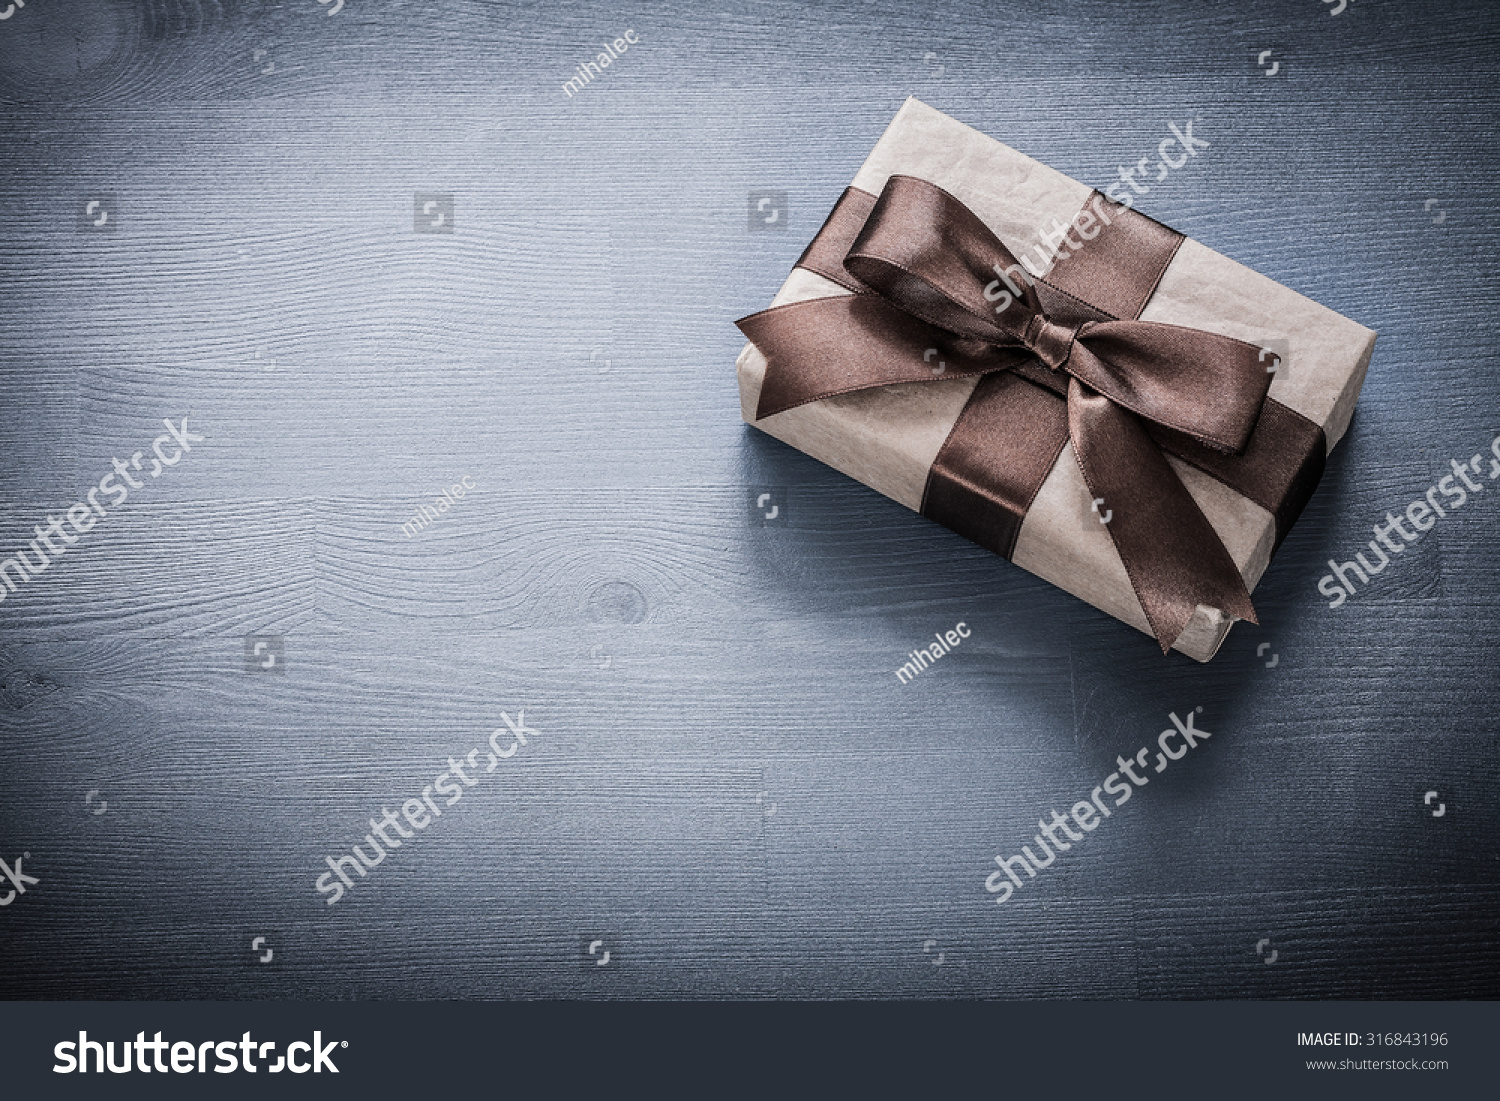 Wrapped present box on vintage wooden board holiday concept. #316843196